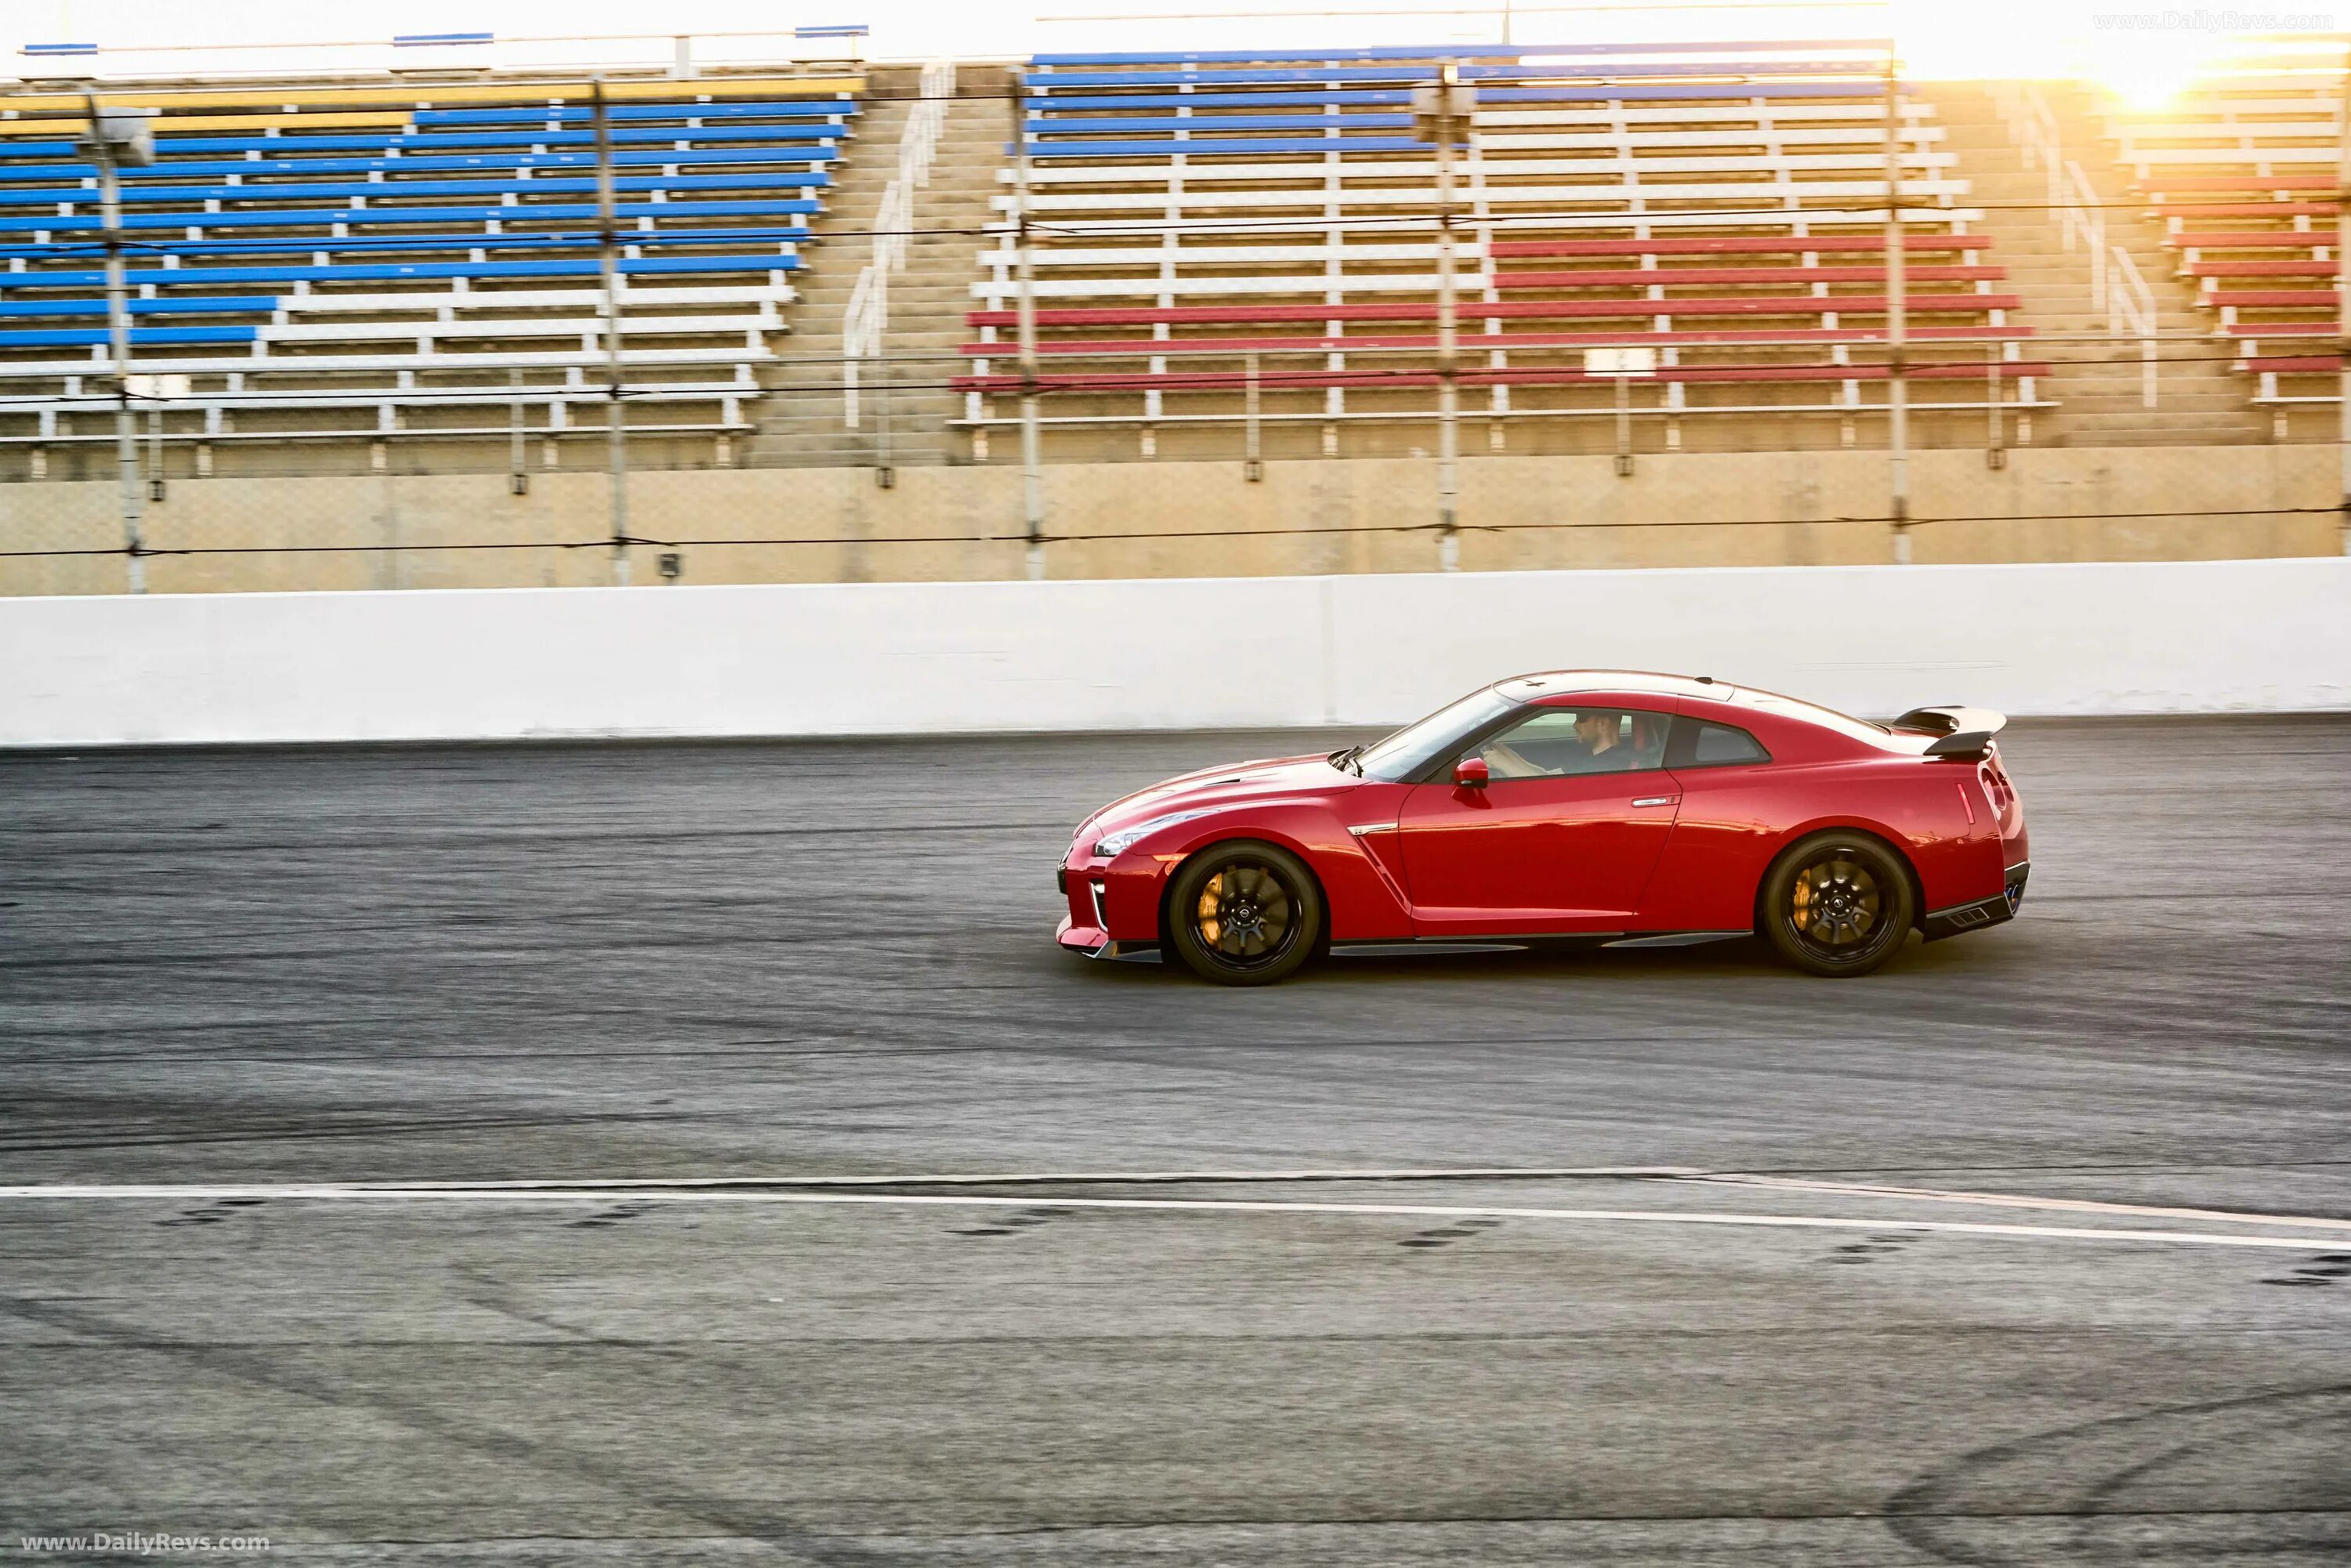 Track r. 2020 Nissan gt-r track Edition. GTR track s70. Racer Red.